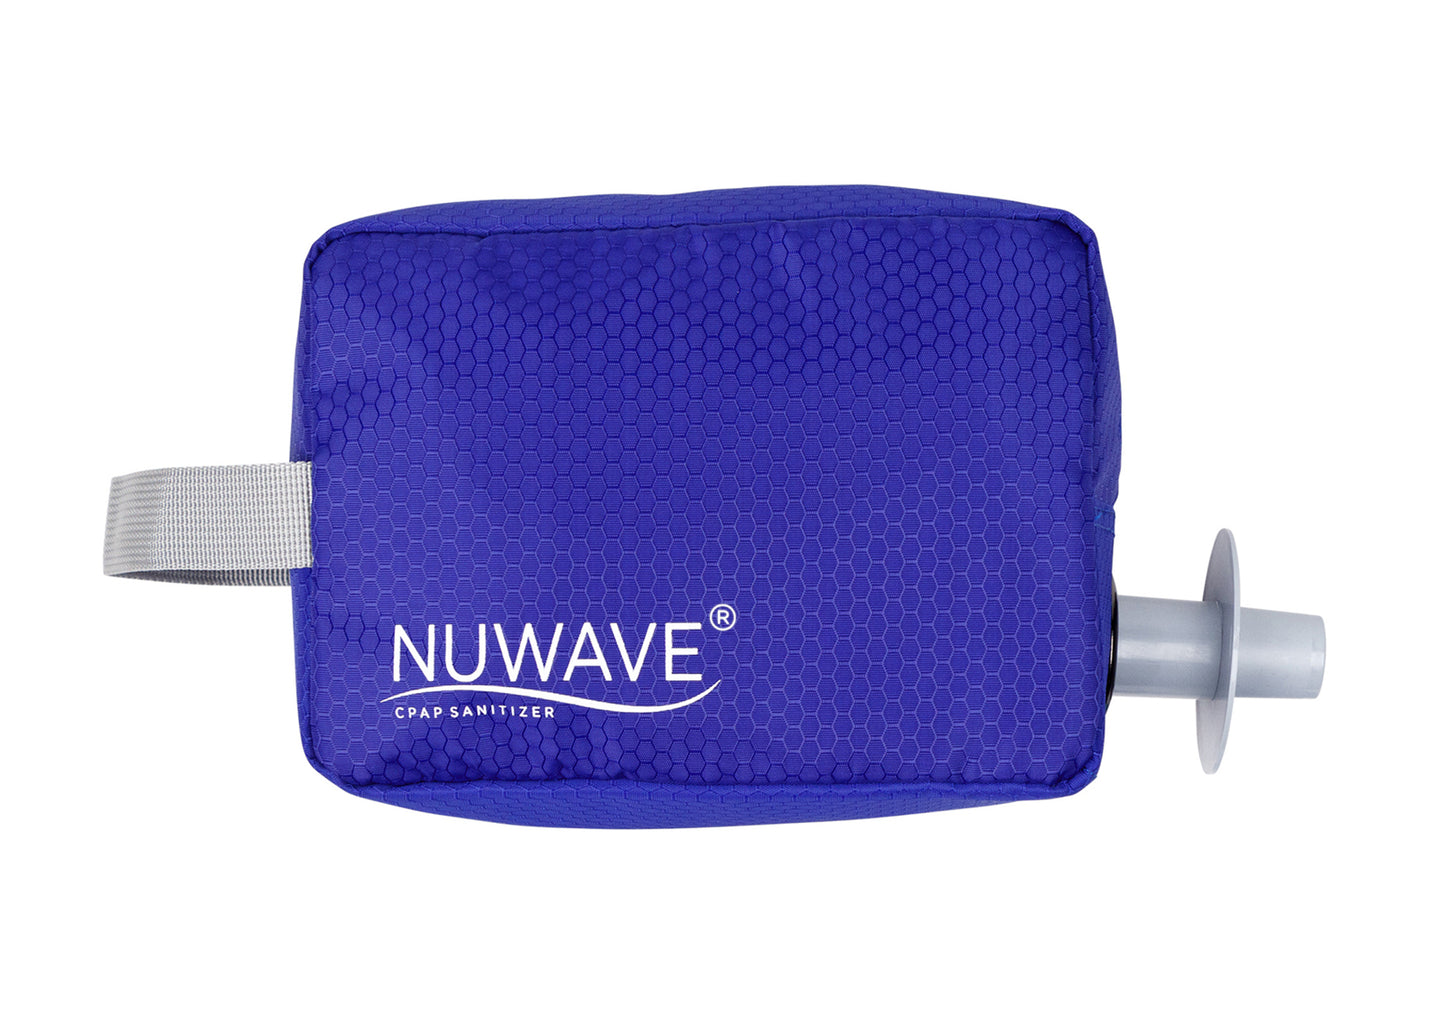 Nuwave Travel Bag Replacement Front.